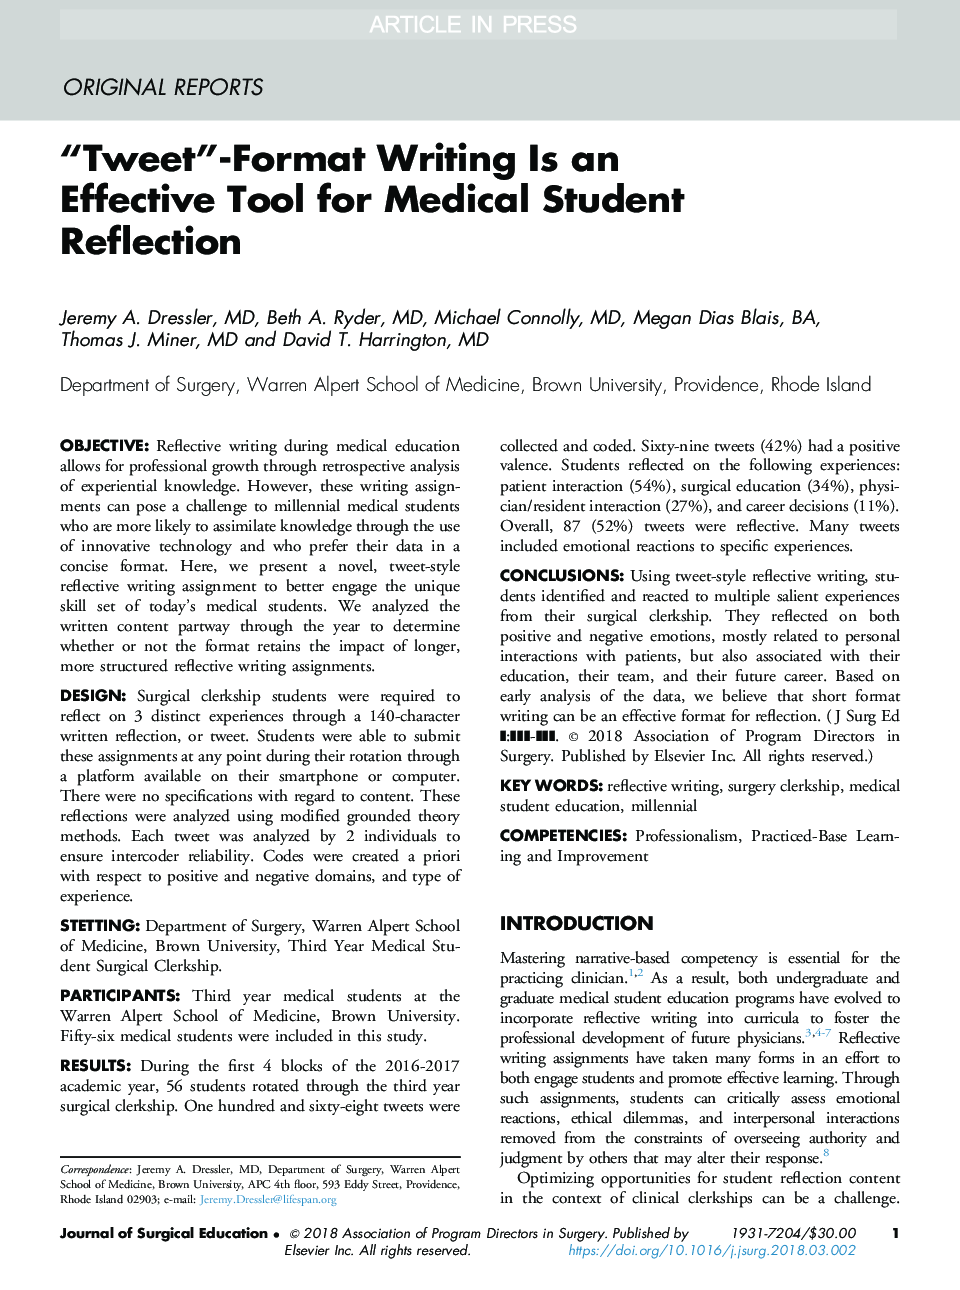 “Tweet”-Format Writing Is an Effective Tool for Medical Student Reflection